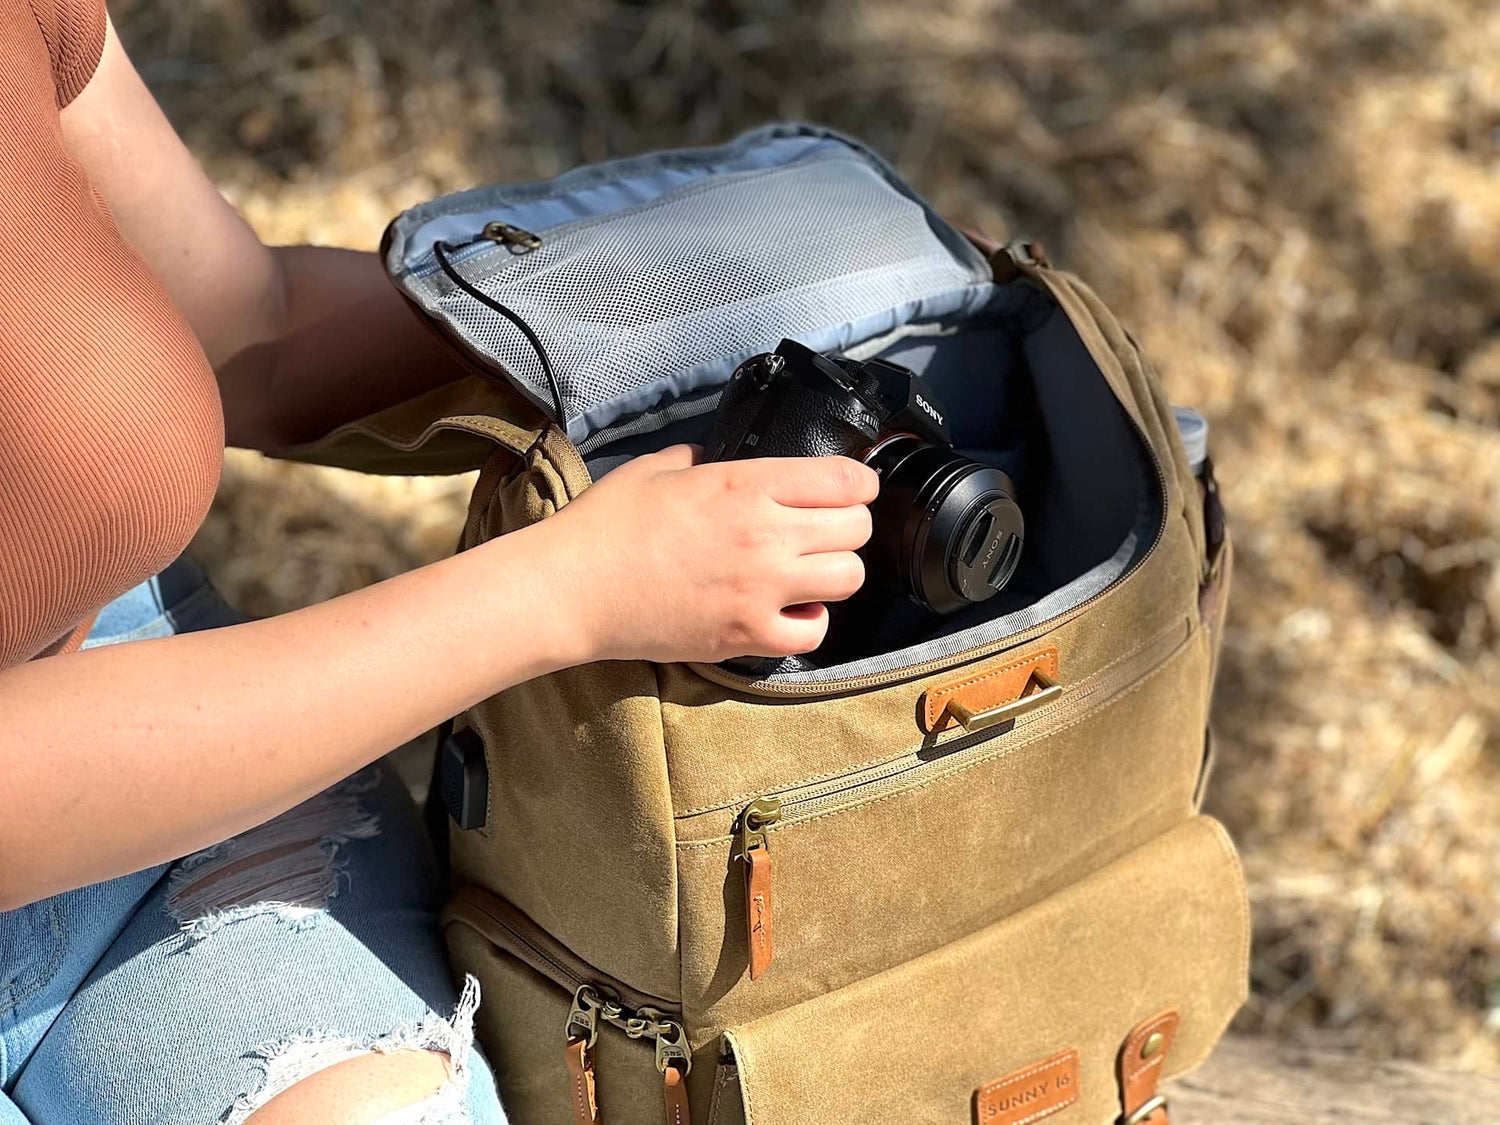 Camera Bags and DSLR Mirrorless Backpacks for Photography - Sunny 16